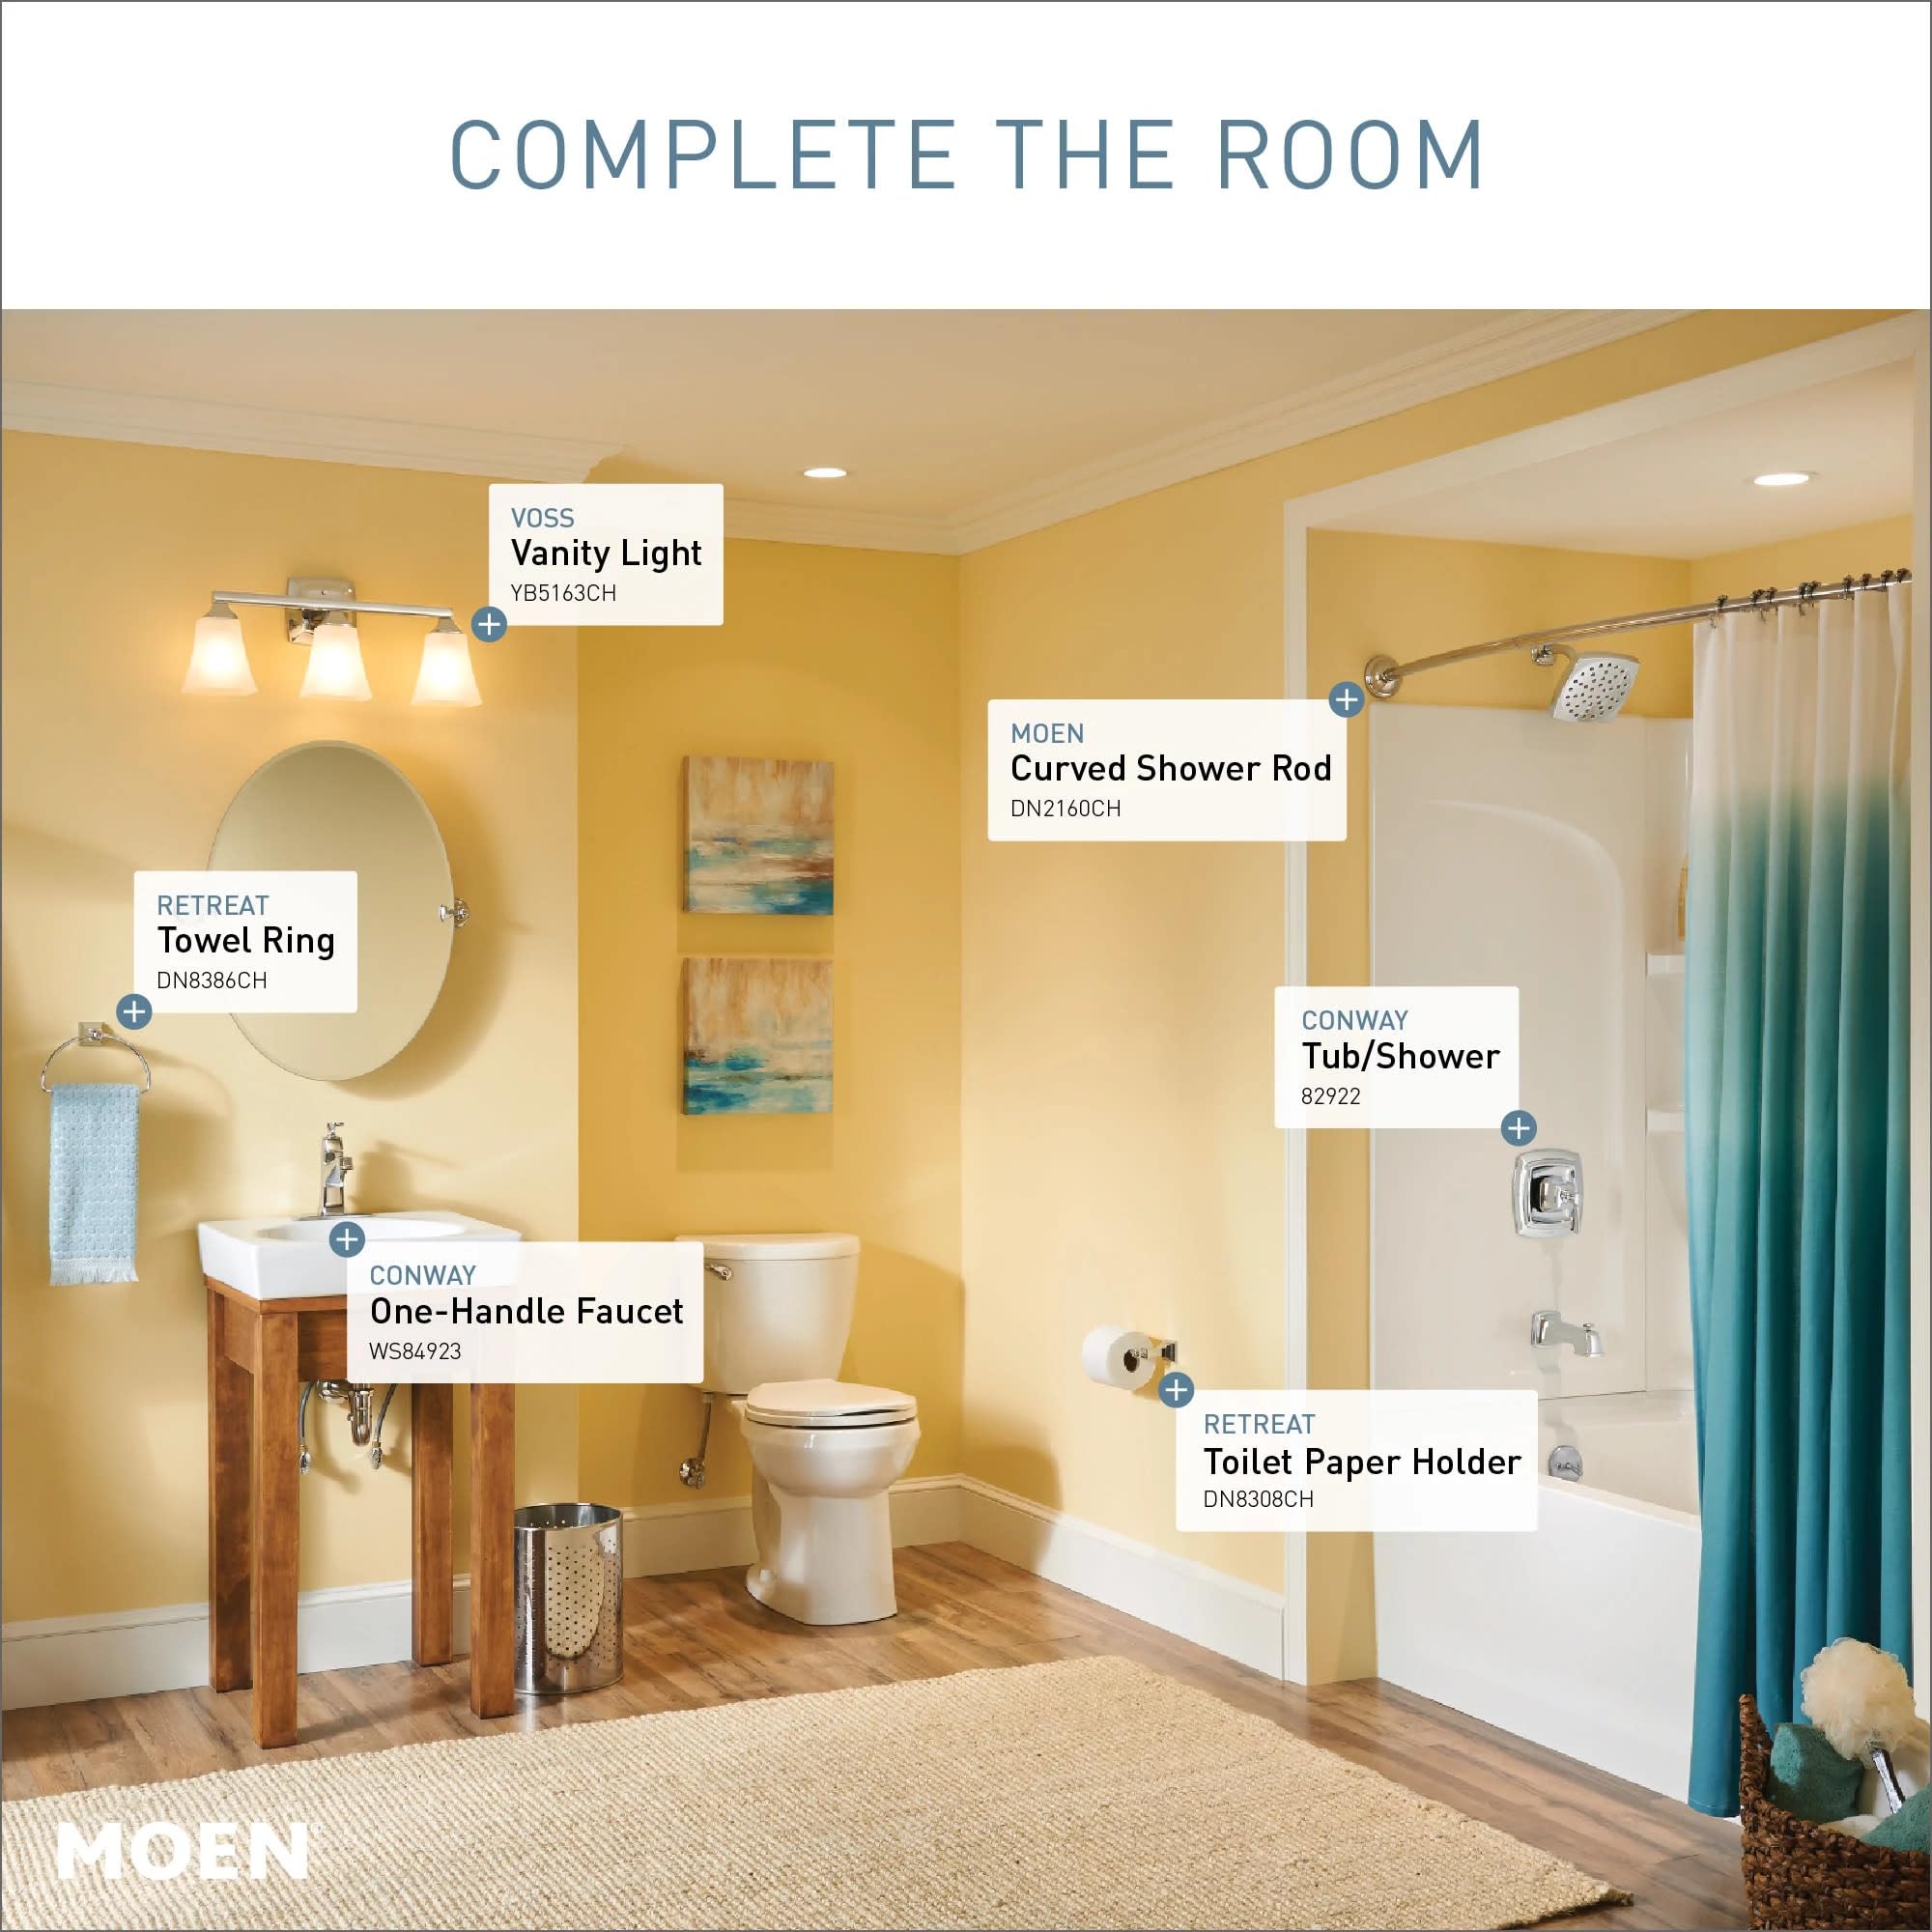 Moen Conway Chrome Posi-Temp Tub and Shower Trim Set Featuring Square Showerhead, Shower Lever Handle, and Tub Spout, Valve Included, 82922